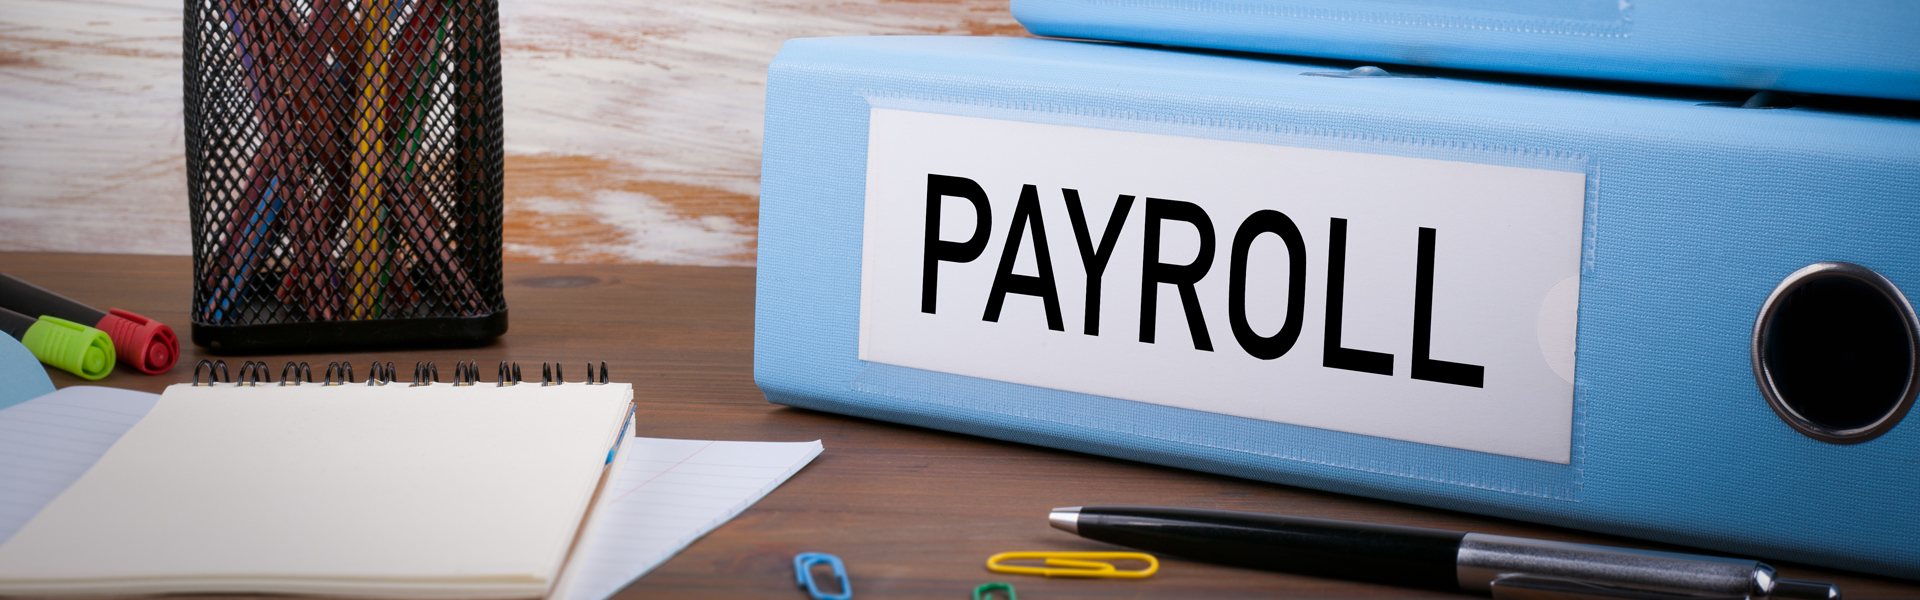 Payroll Outsourcing is a growing business now due to changing economic 